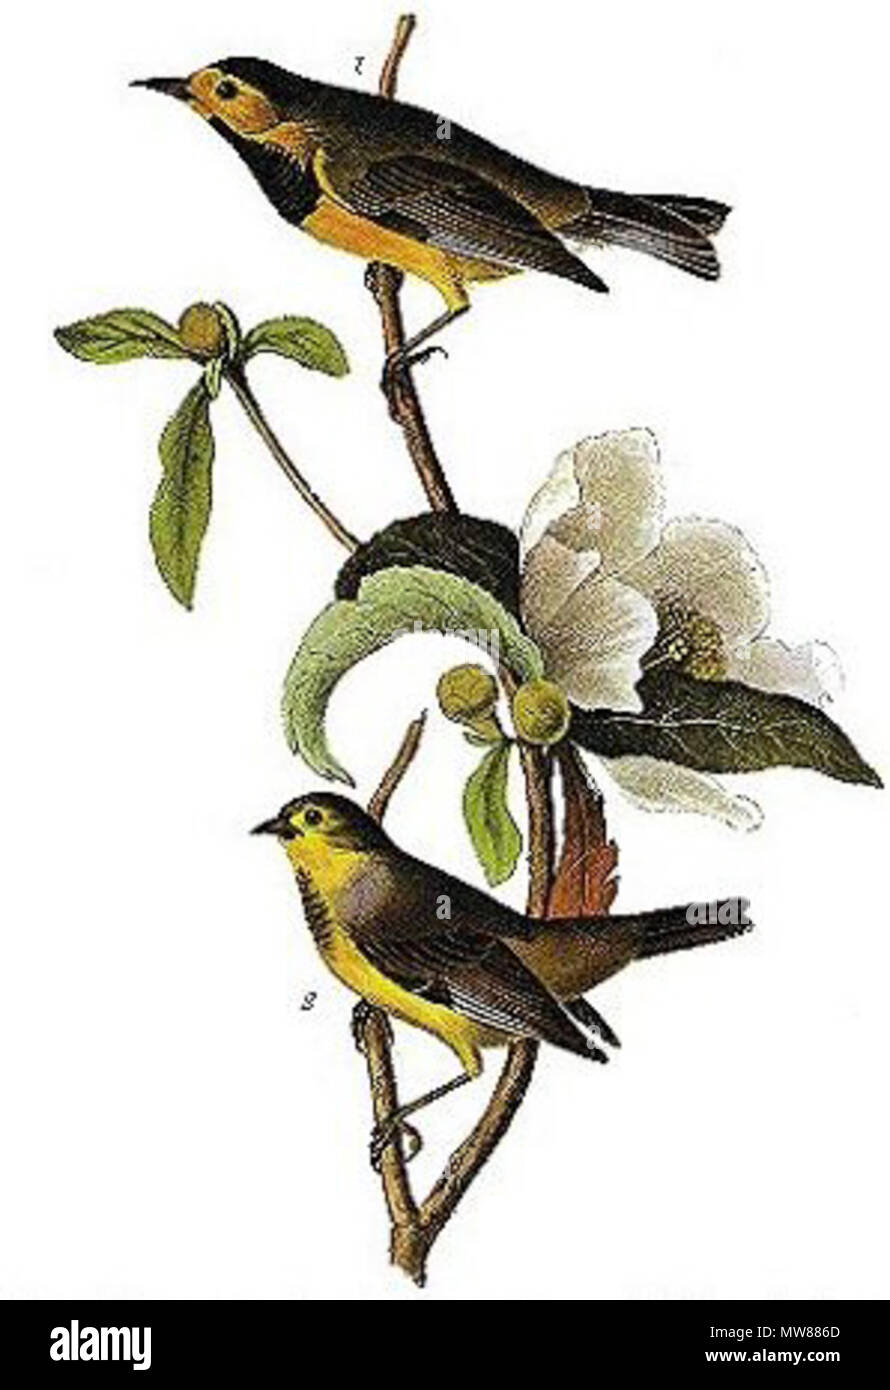 . English: Lithograph from Audubon's Birds of America . between 1927 and 1938.   John James Audubon  (1785–1851)       Alternative names Birth name: Jean-Jacques-Fougère Audubon  Description American ornithologist, naturalist, hunter and painter  Date of birth/death 26 April 1785 27 January 1851  Location of birth/death Les Cayes (Haiti) New York City  Work location Louisville, New Orleans, New York City, Florida  Authority control  : Q182882 VIAF: 14765625 ISNI: 0000 0001 1040 5229 ULAN: 500016578 LCCN: n79018677 NLA: 35010139 WorldCat 67 Bachman Swamp Warbler Stock Photo